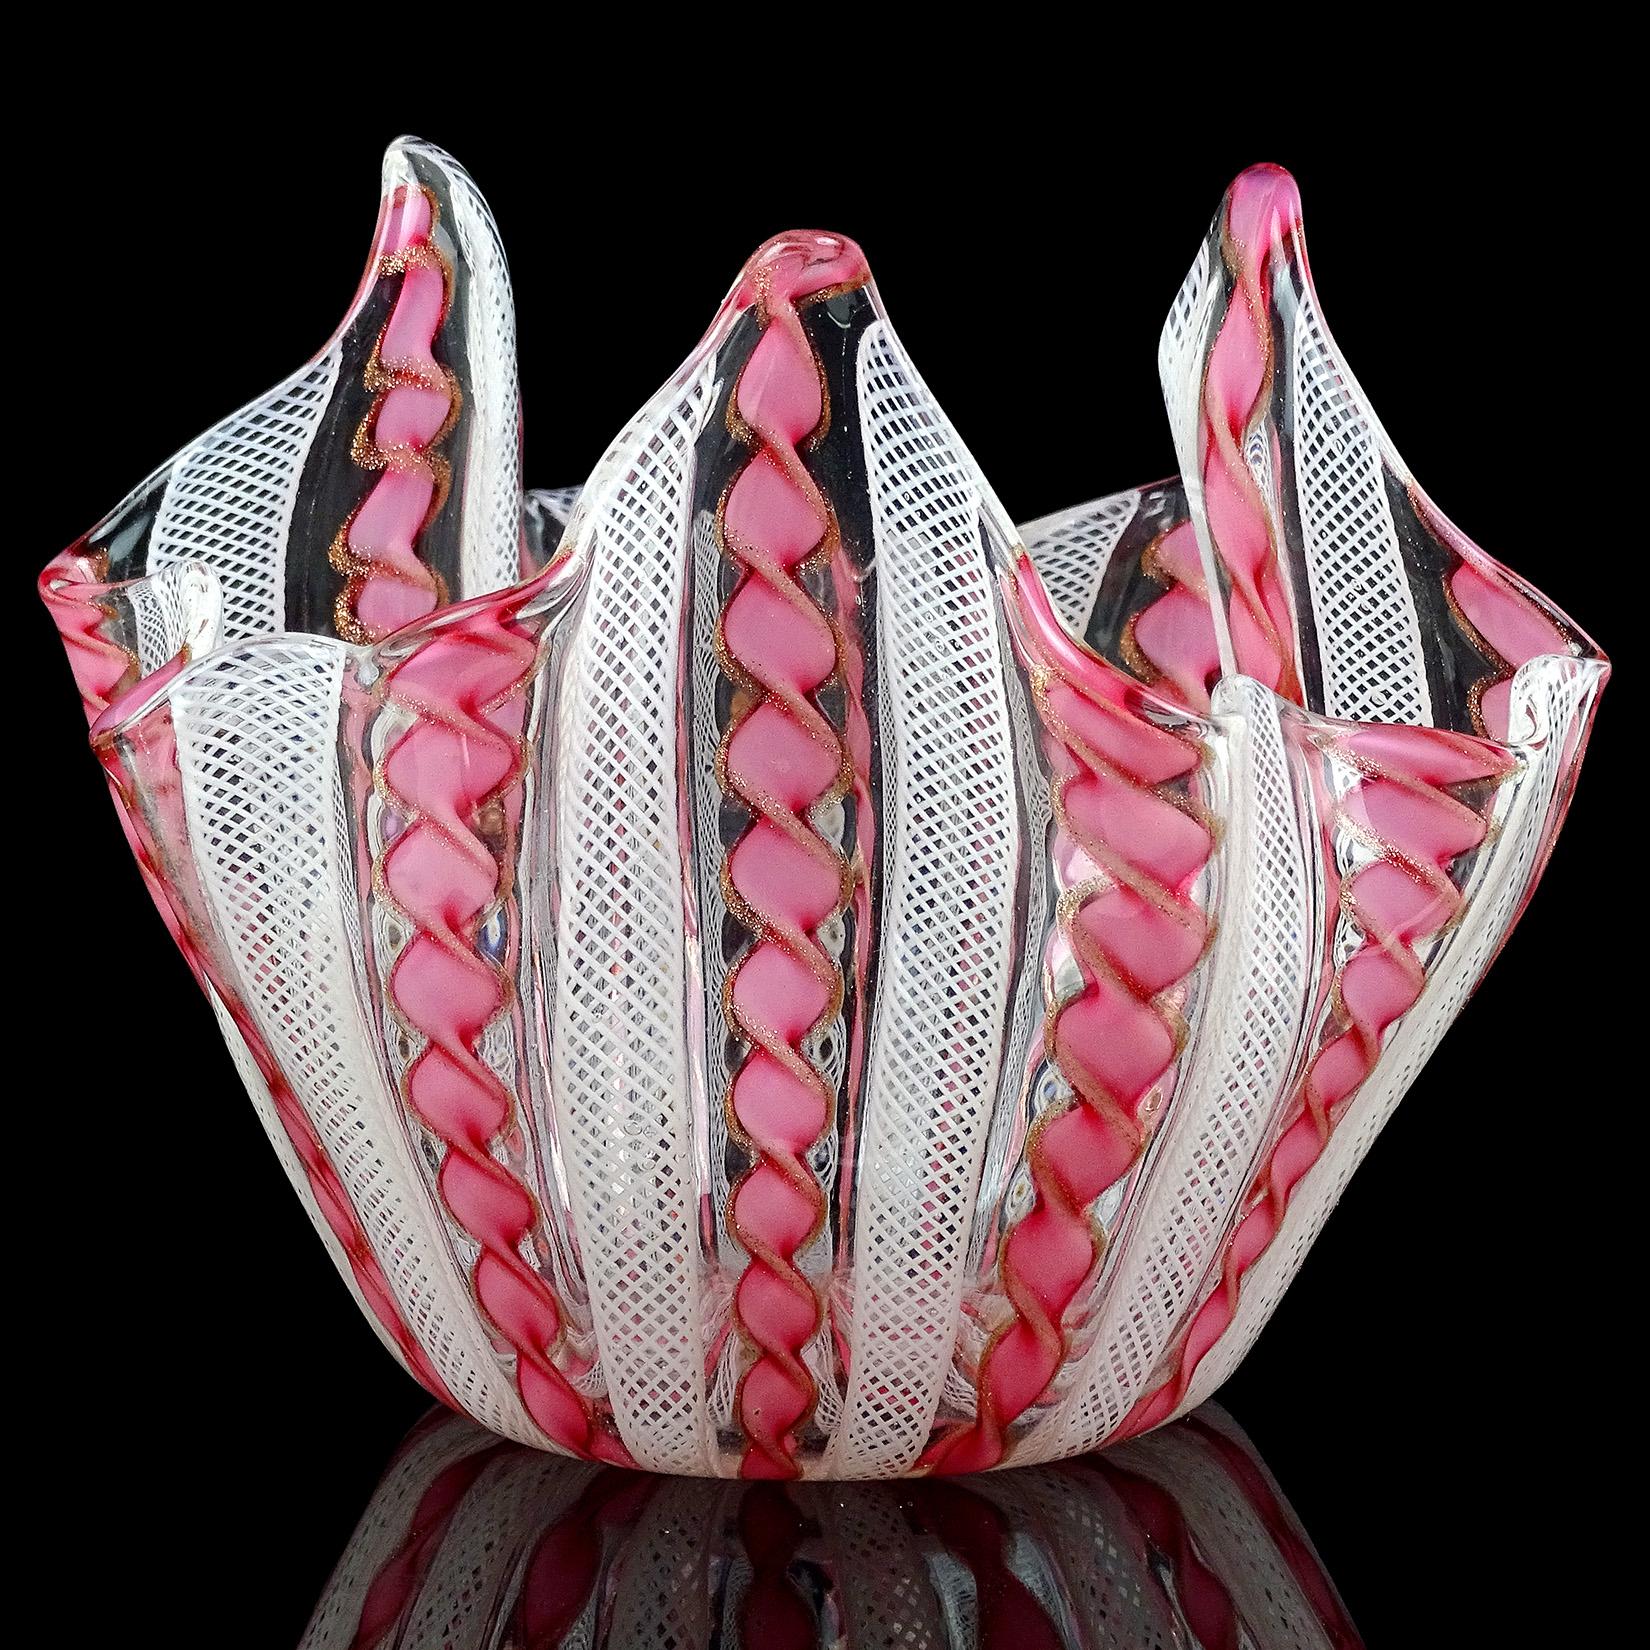 Beautiful vintage Murano hand blown pink, aventurine and white Italian art glass fazzoletto flower vase. Documented to the Fratelli Toso company. The piece is made with twisting pink and copper aventurine fleck Latticino ribbons, and white net